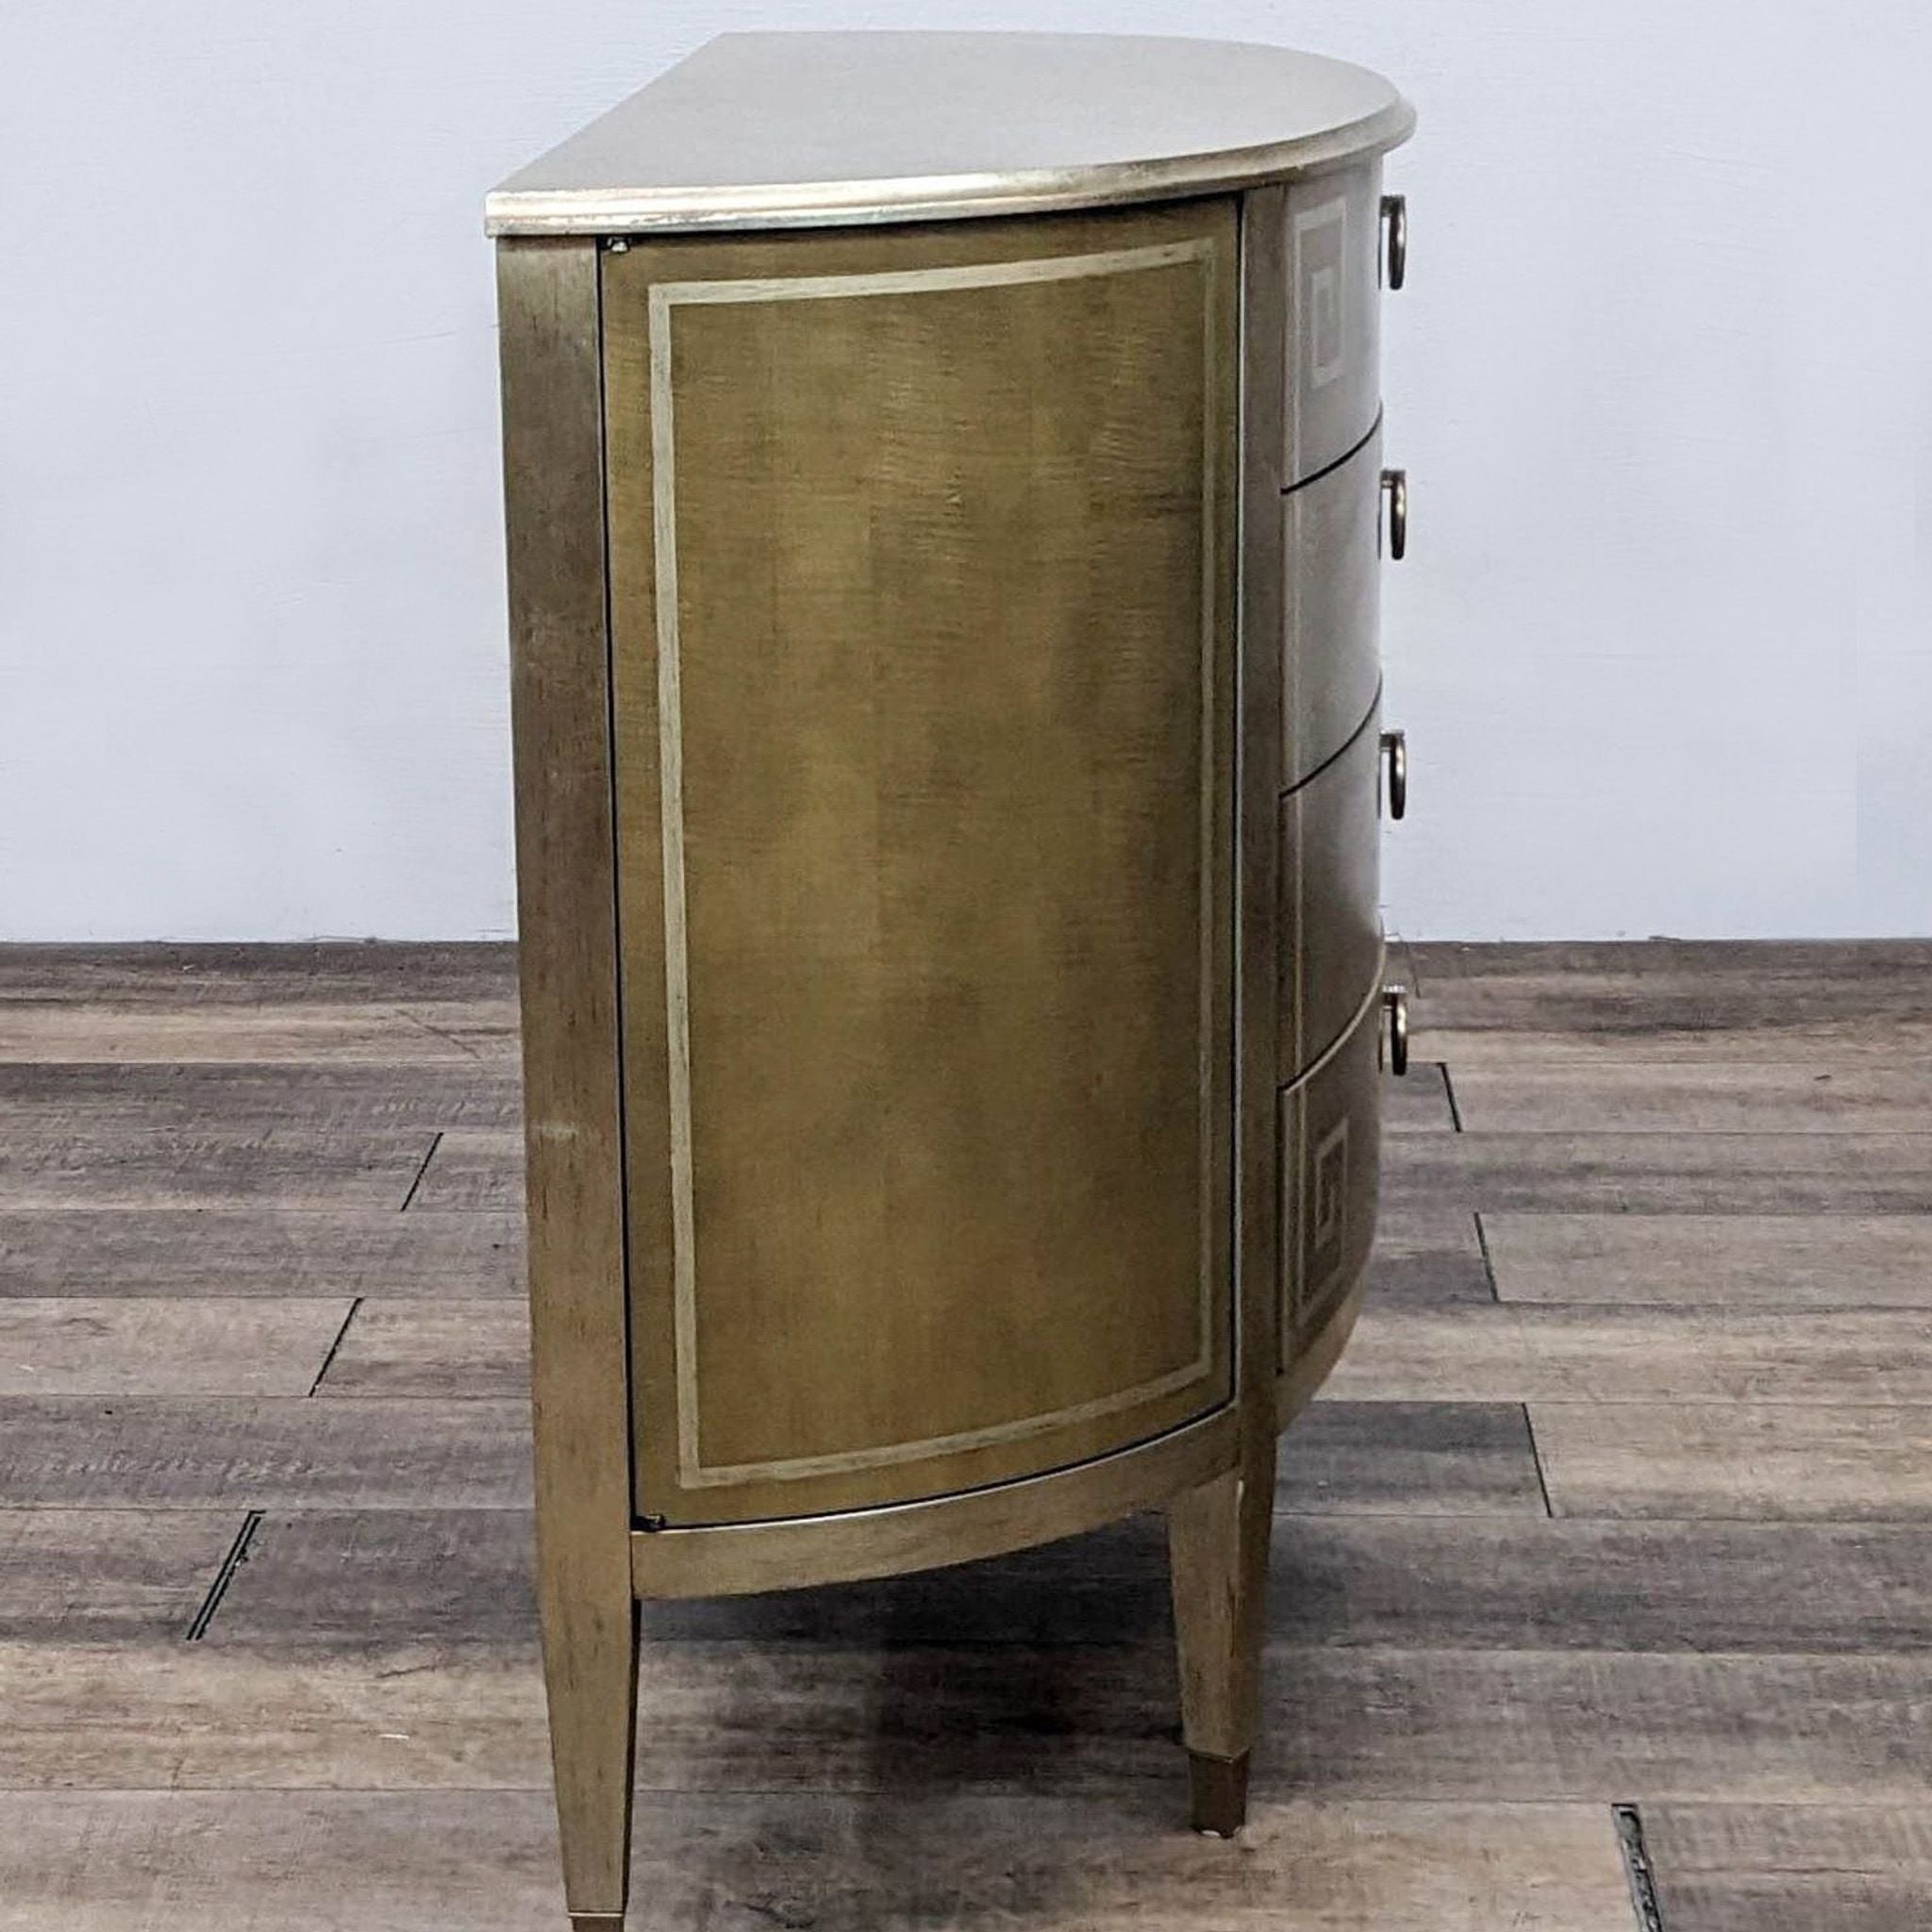 Caracole brand curved cabinet with a gold finish and side drawer detail on wooden flooring.